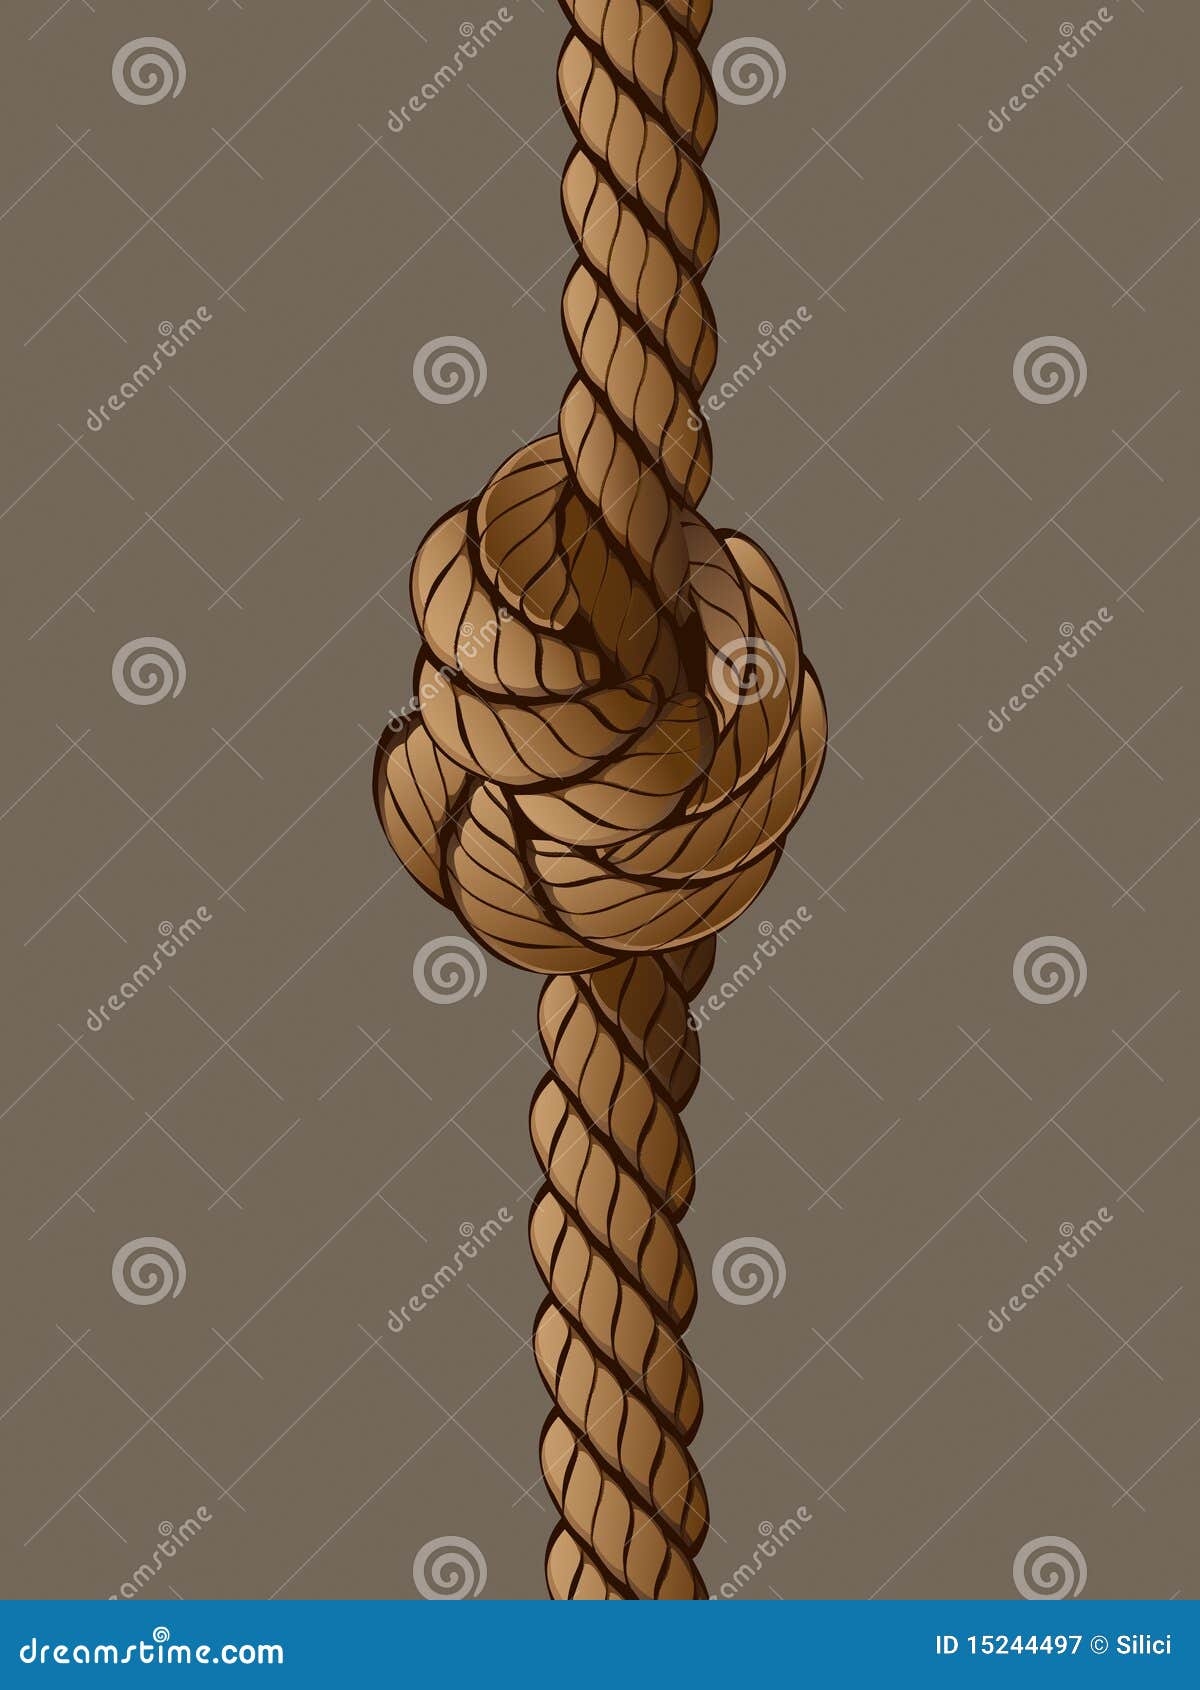 Rope Set 3 stock vector. Illustration of knot, path, line - 15244497